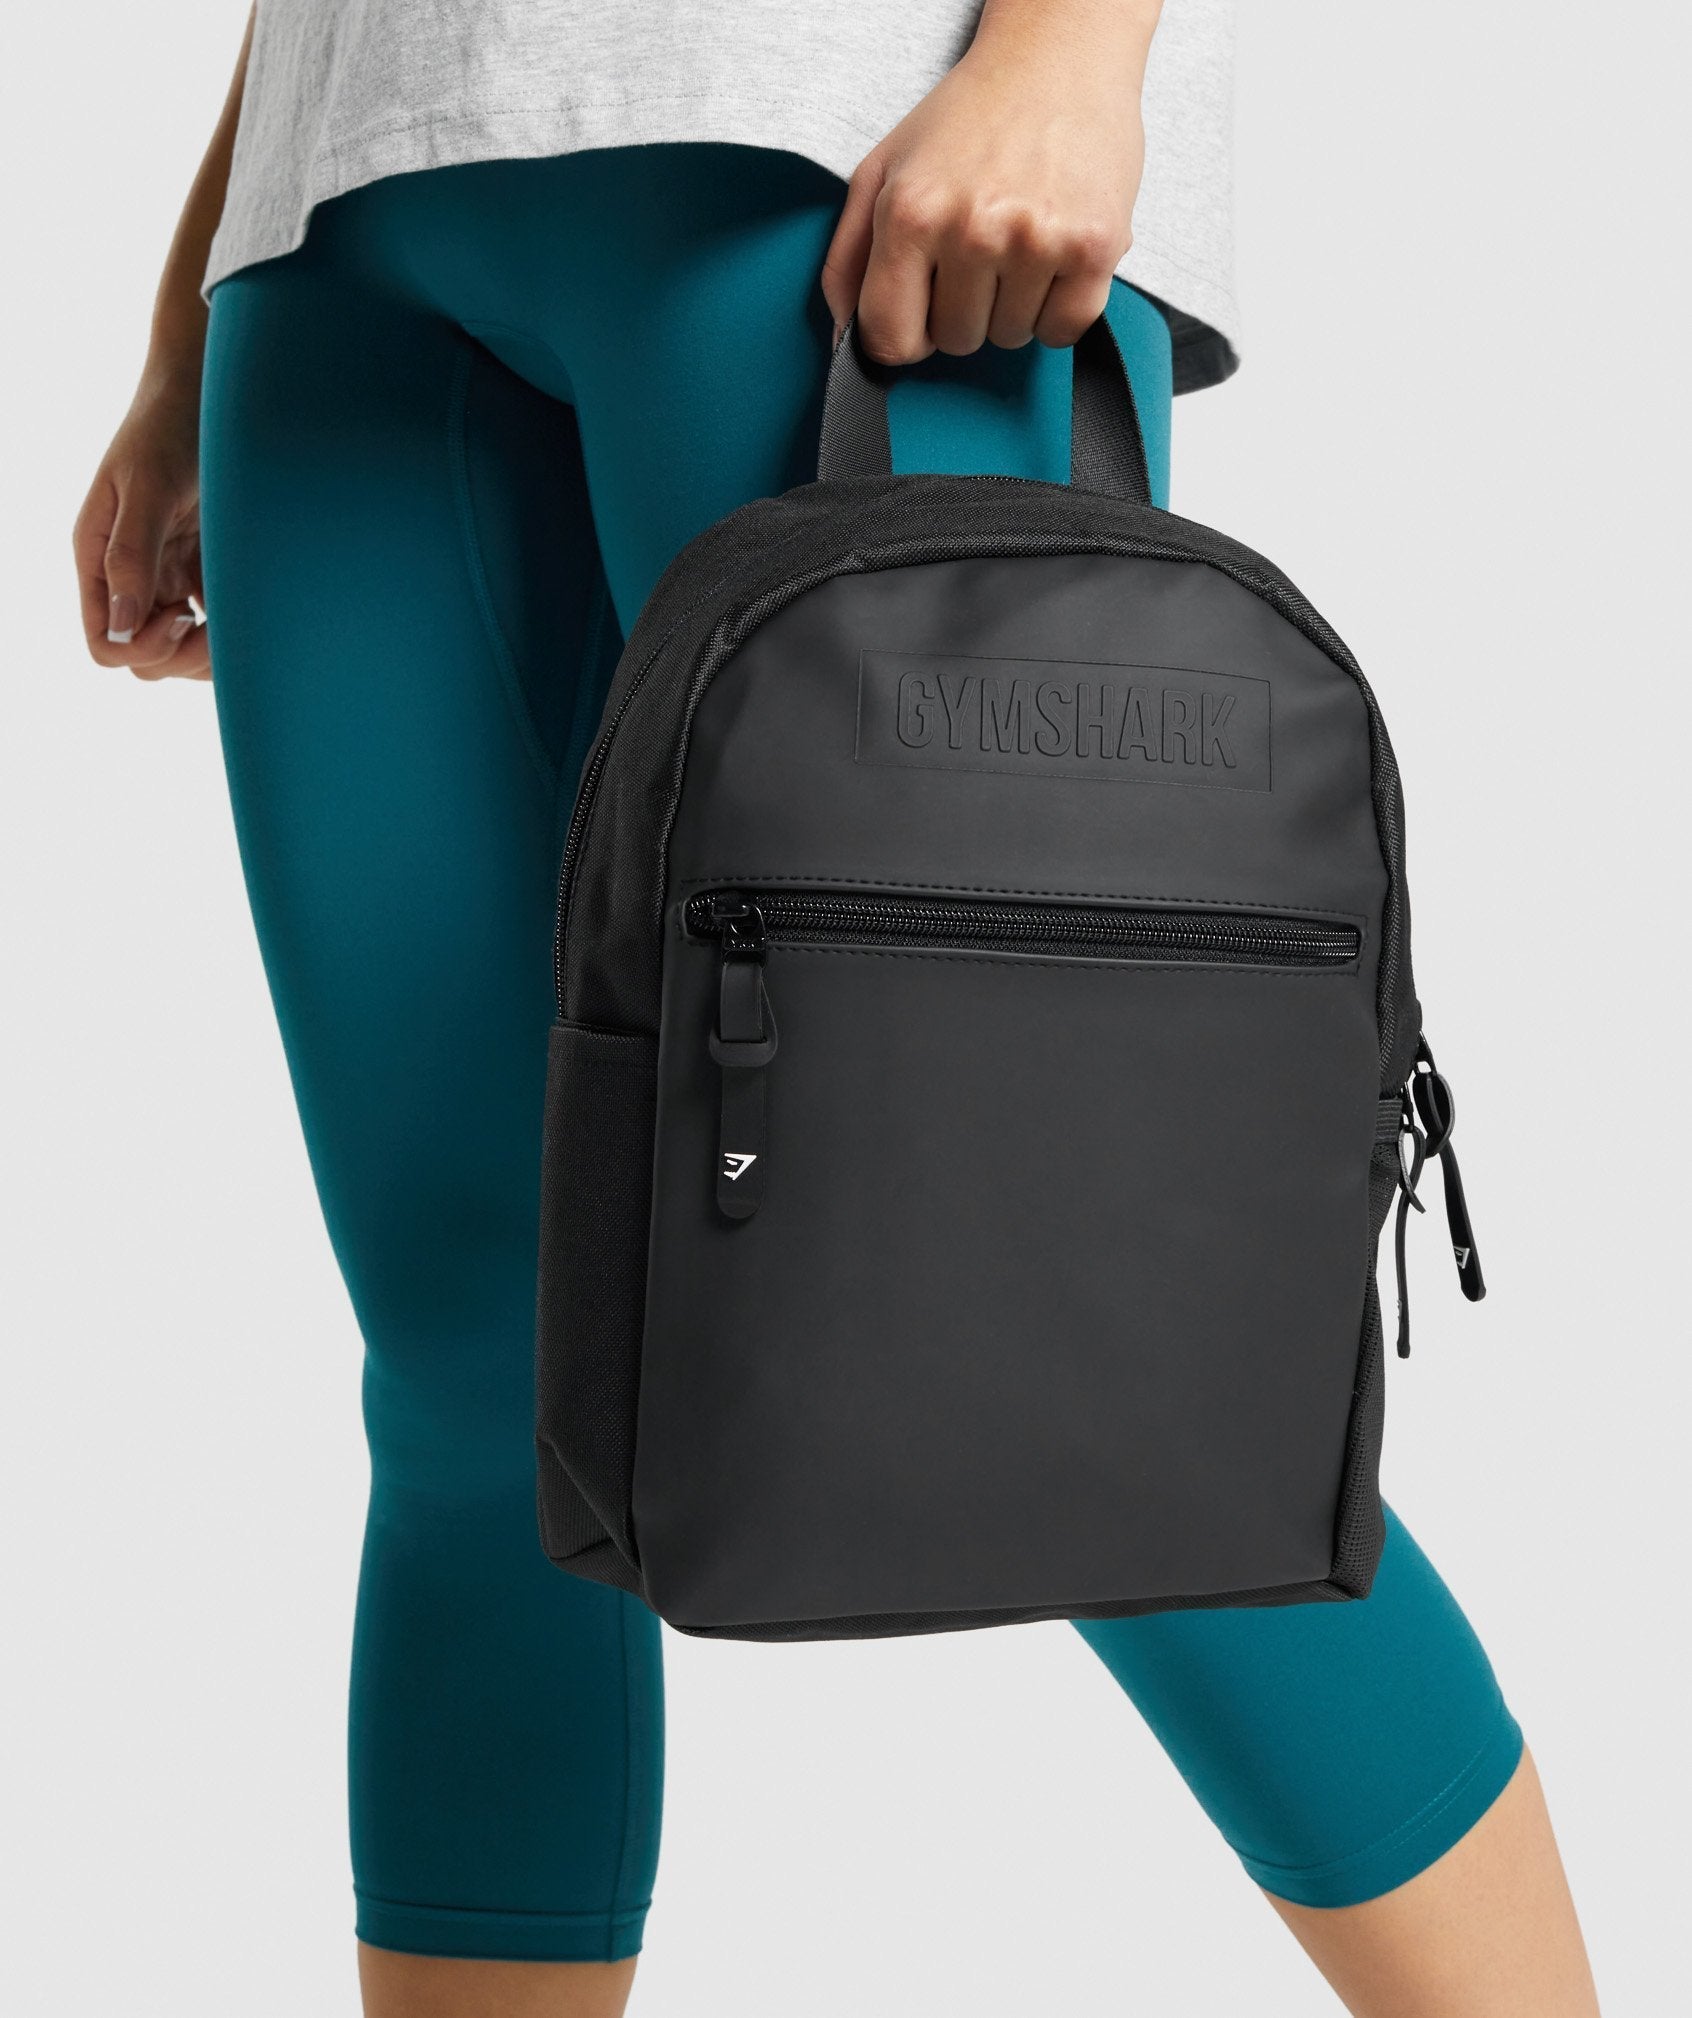 Everyday Mini Backpack in Black - view 6